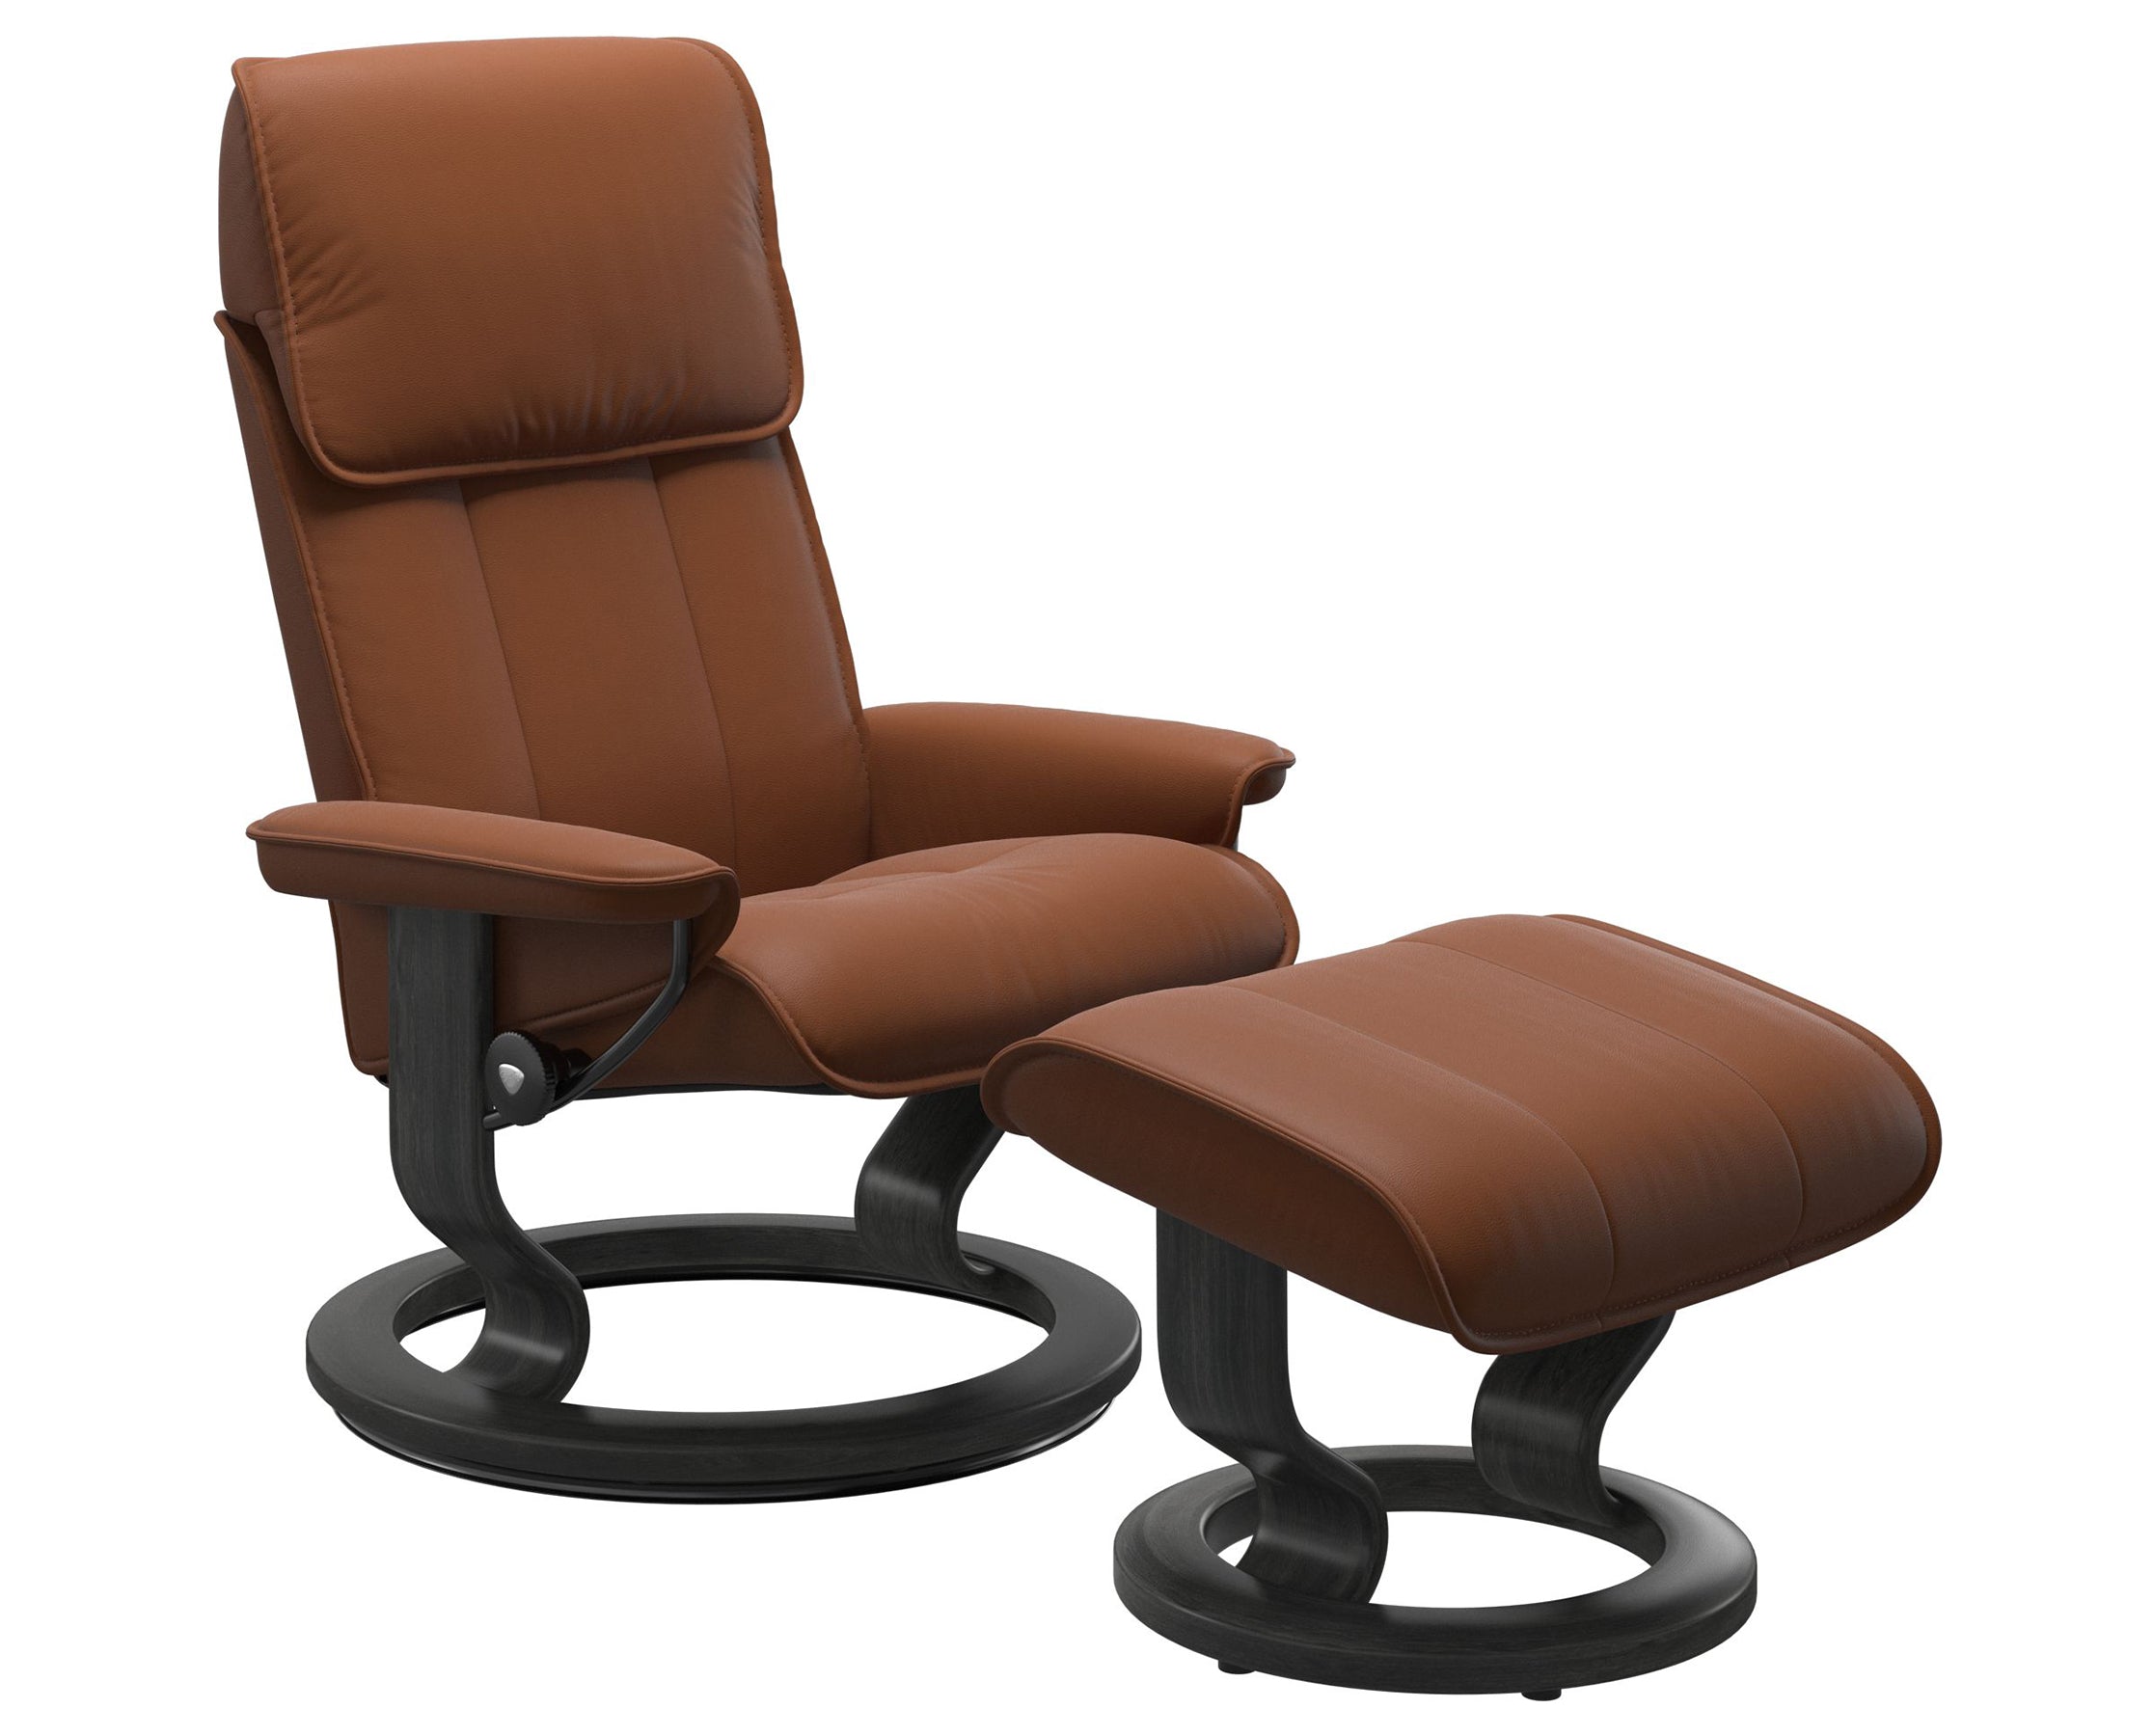 Paloma Leather New Cognac M/L and Grey Base | Stressless Admiral Classic Recliner | Valley Ridge Furniture